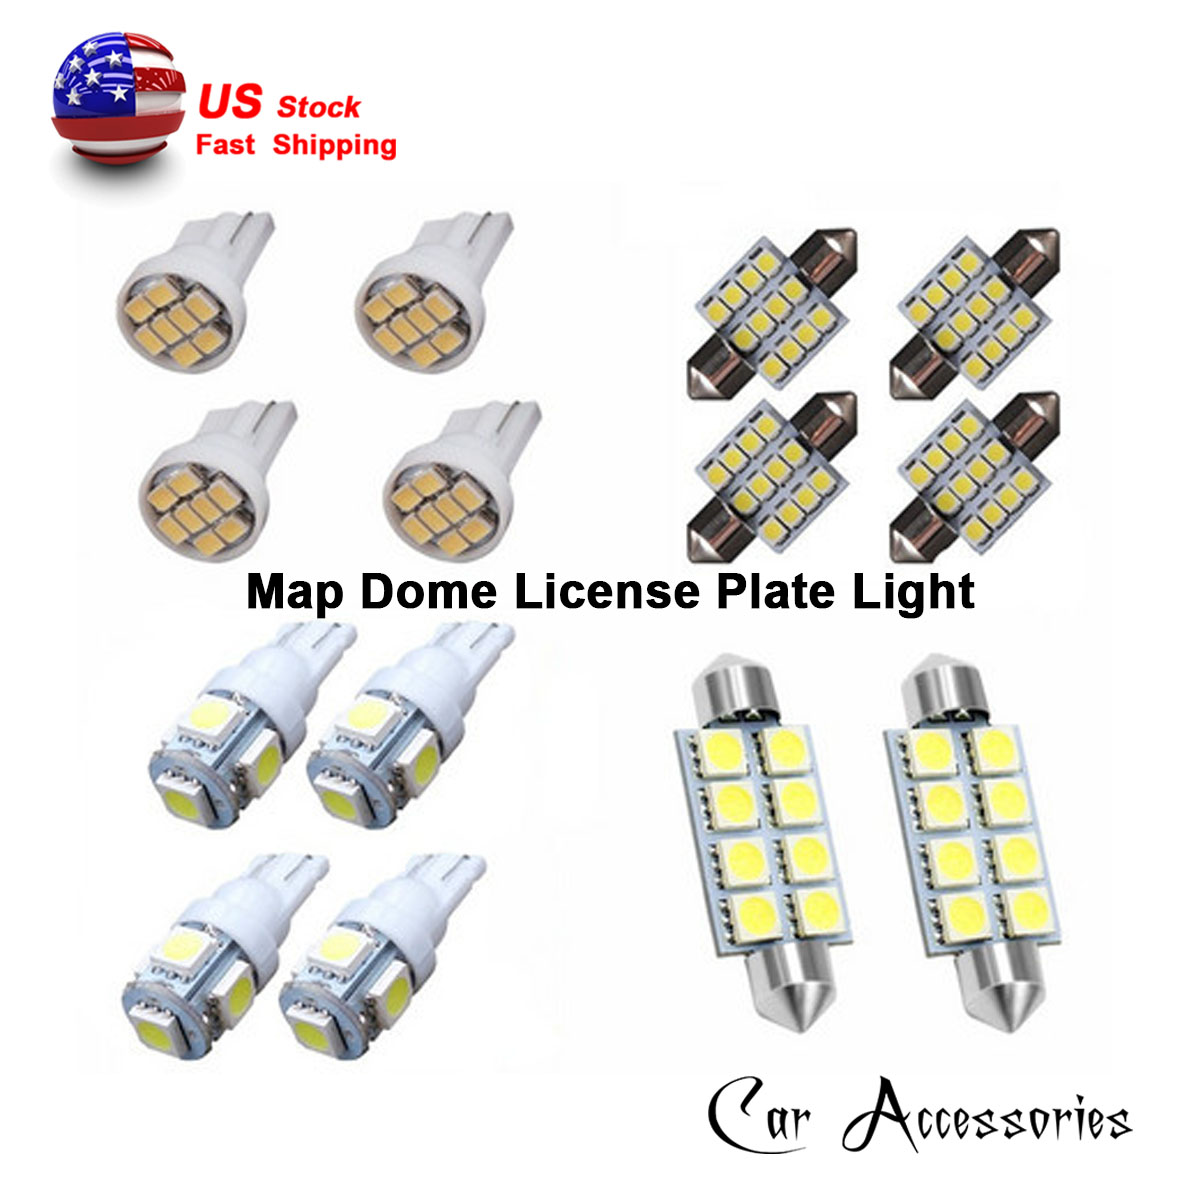 License Plate munirater 14-Pack White LED Light Interior Package Kit Fit for T10 & 31mm Map Dome 